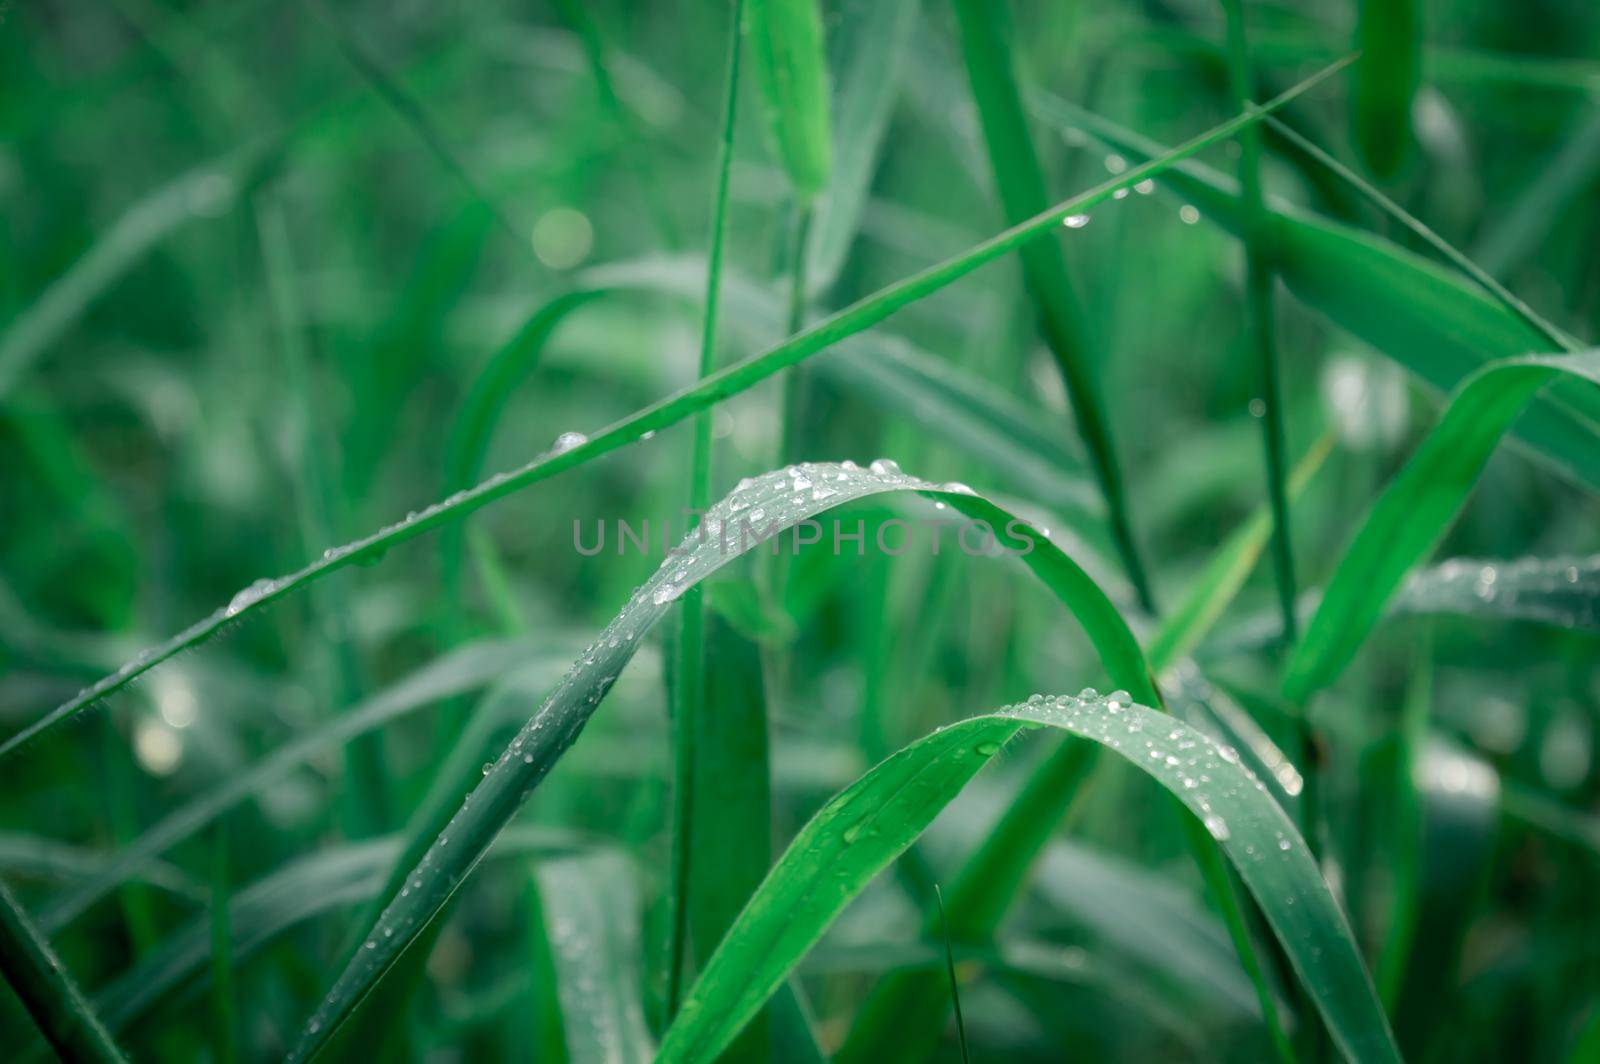 Raindrops on leaf. Close up of rain water dew droplets on grass crop plant. Sunlight reflection. Rural scene in agricultural field lawn meadow. Winter morning rainy season. Beauty in nature background by sudiptabhowmick